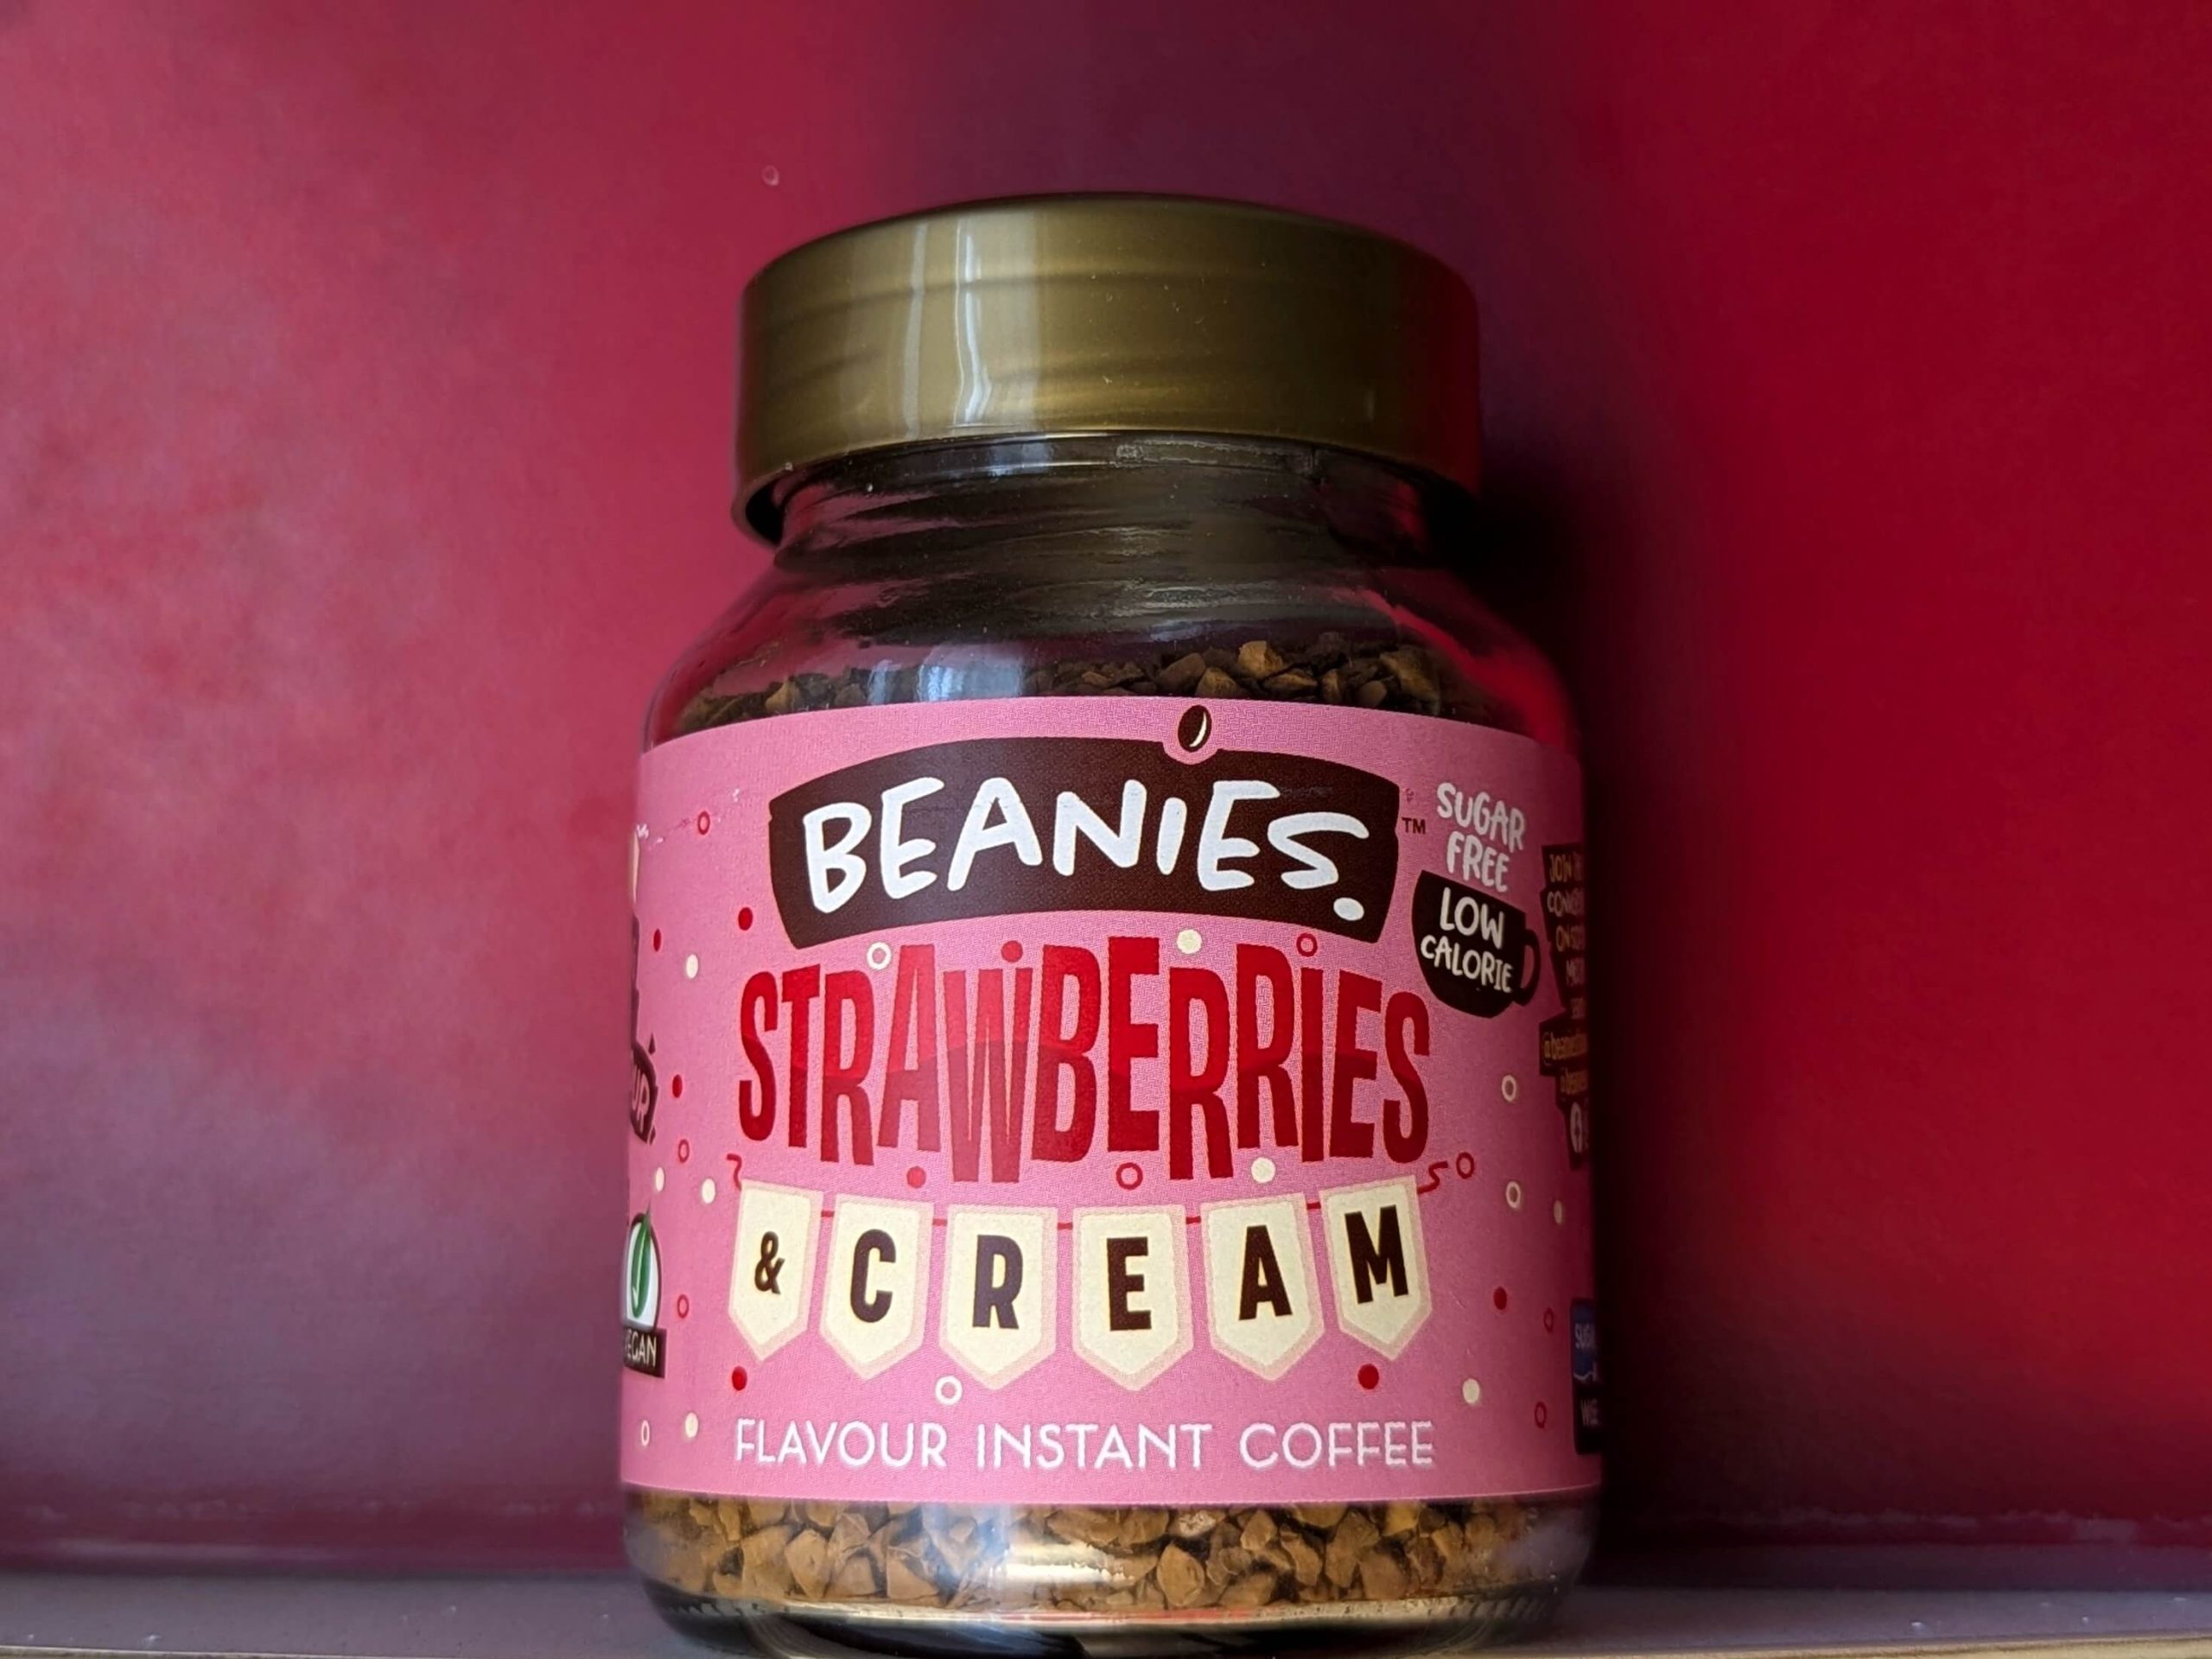 pot of Beanies Strawberries & Cream Instant Coffee against a red background